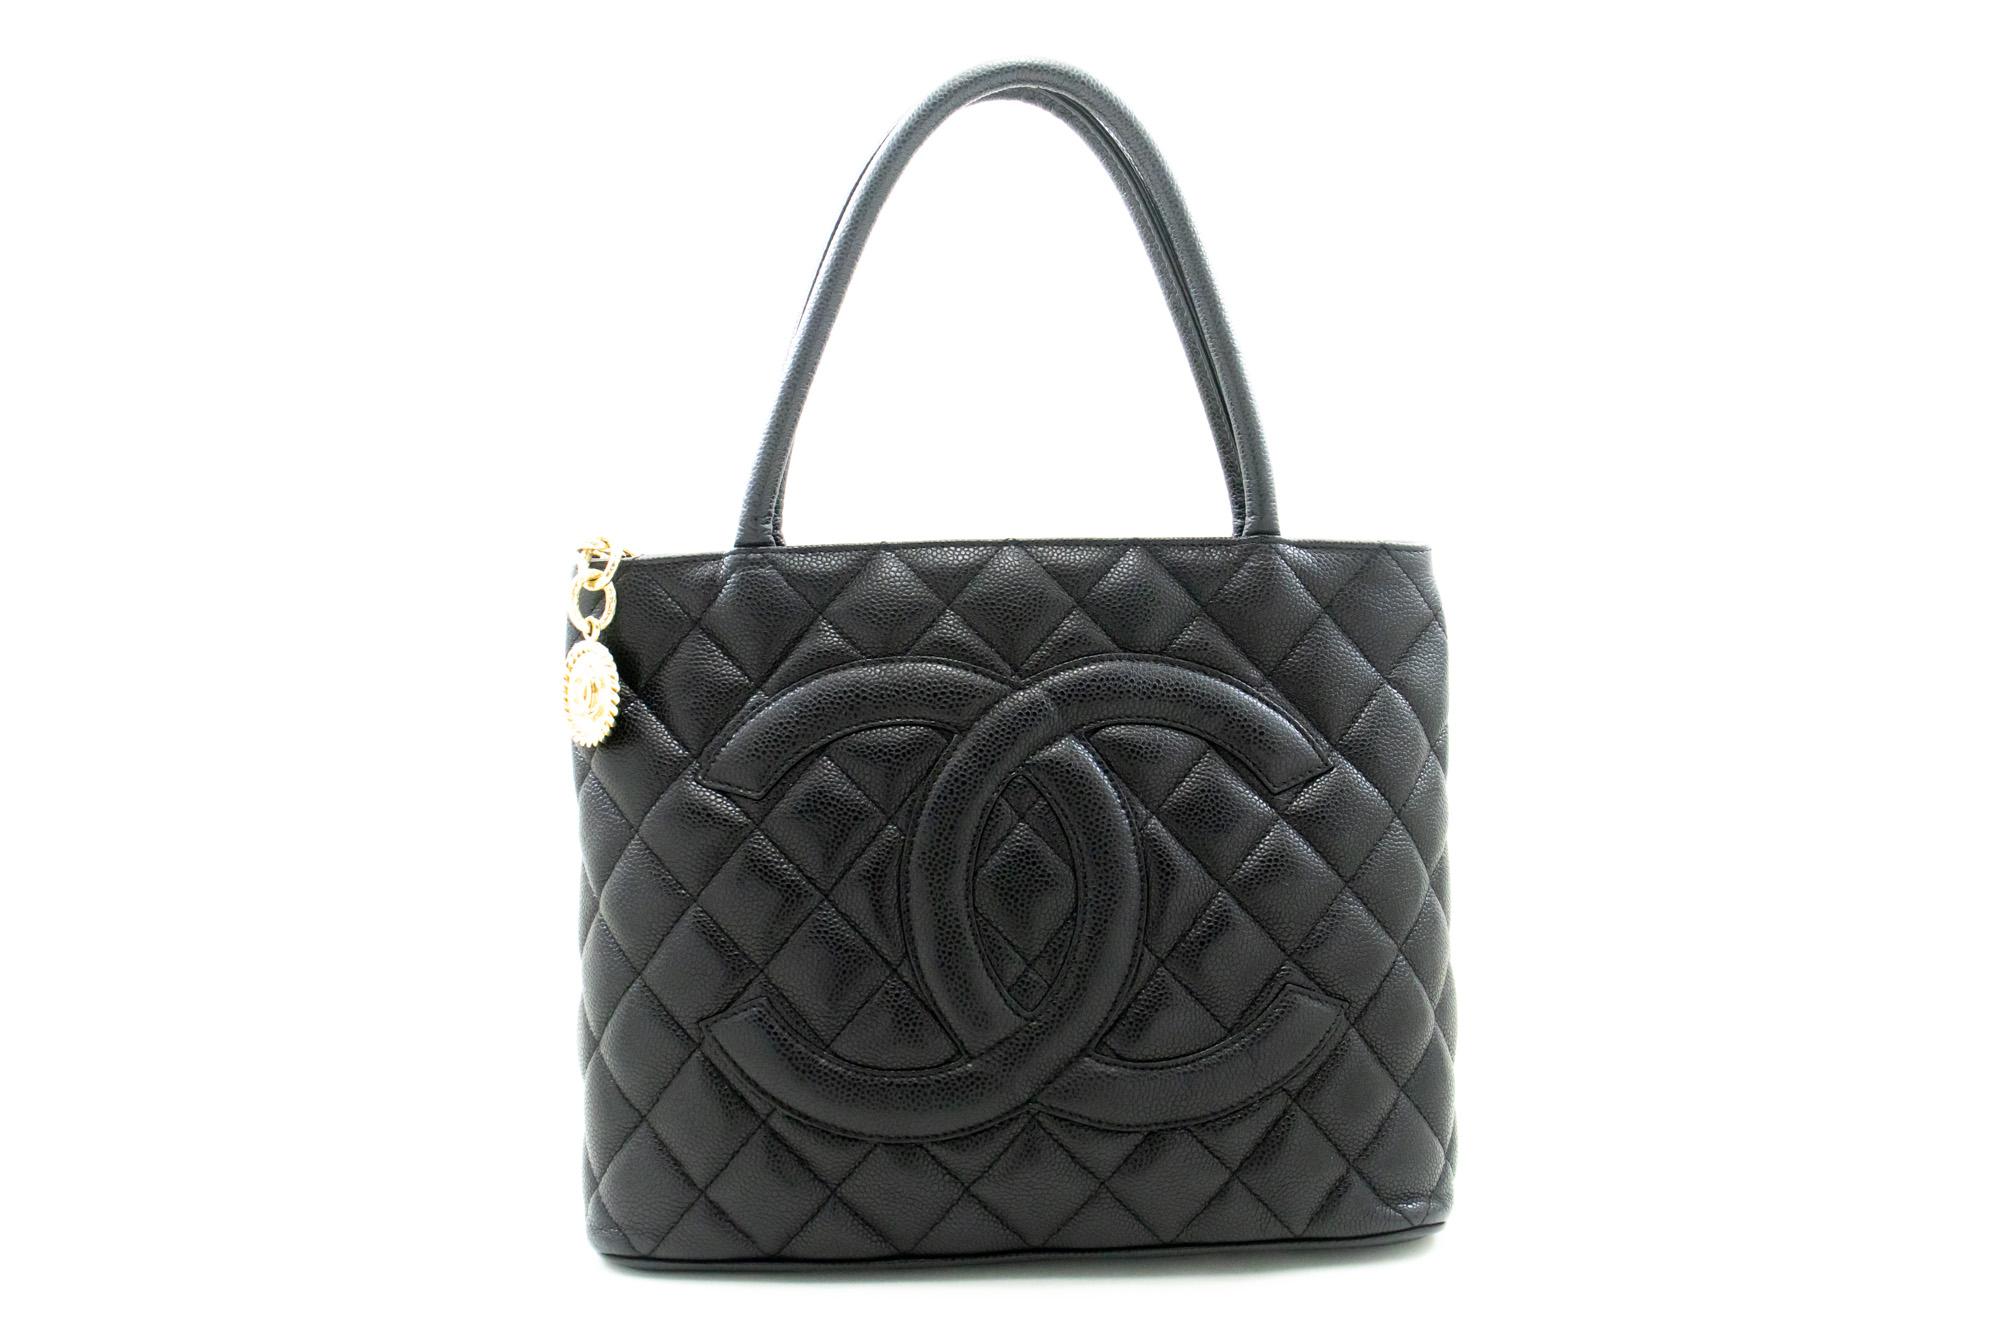 An authentic CHANEL Gold Medallion Caviar Shoulder Bag Grand Shopping Tote. The color is Black. The outside material is Leather. The pattern is Solid. This item is Contemporary. The year of manufacture would be 2010.
Conditions & Ratings
Outside